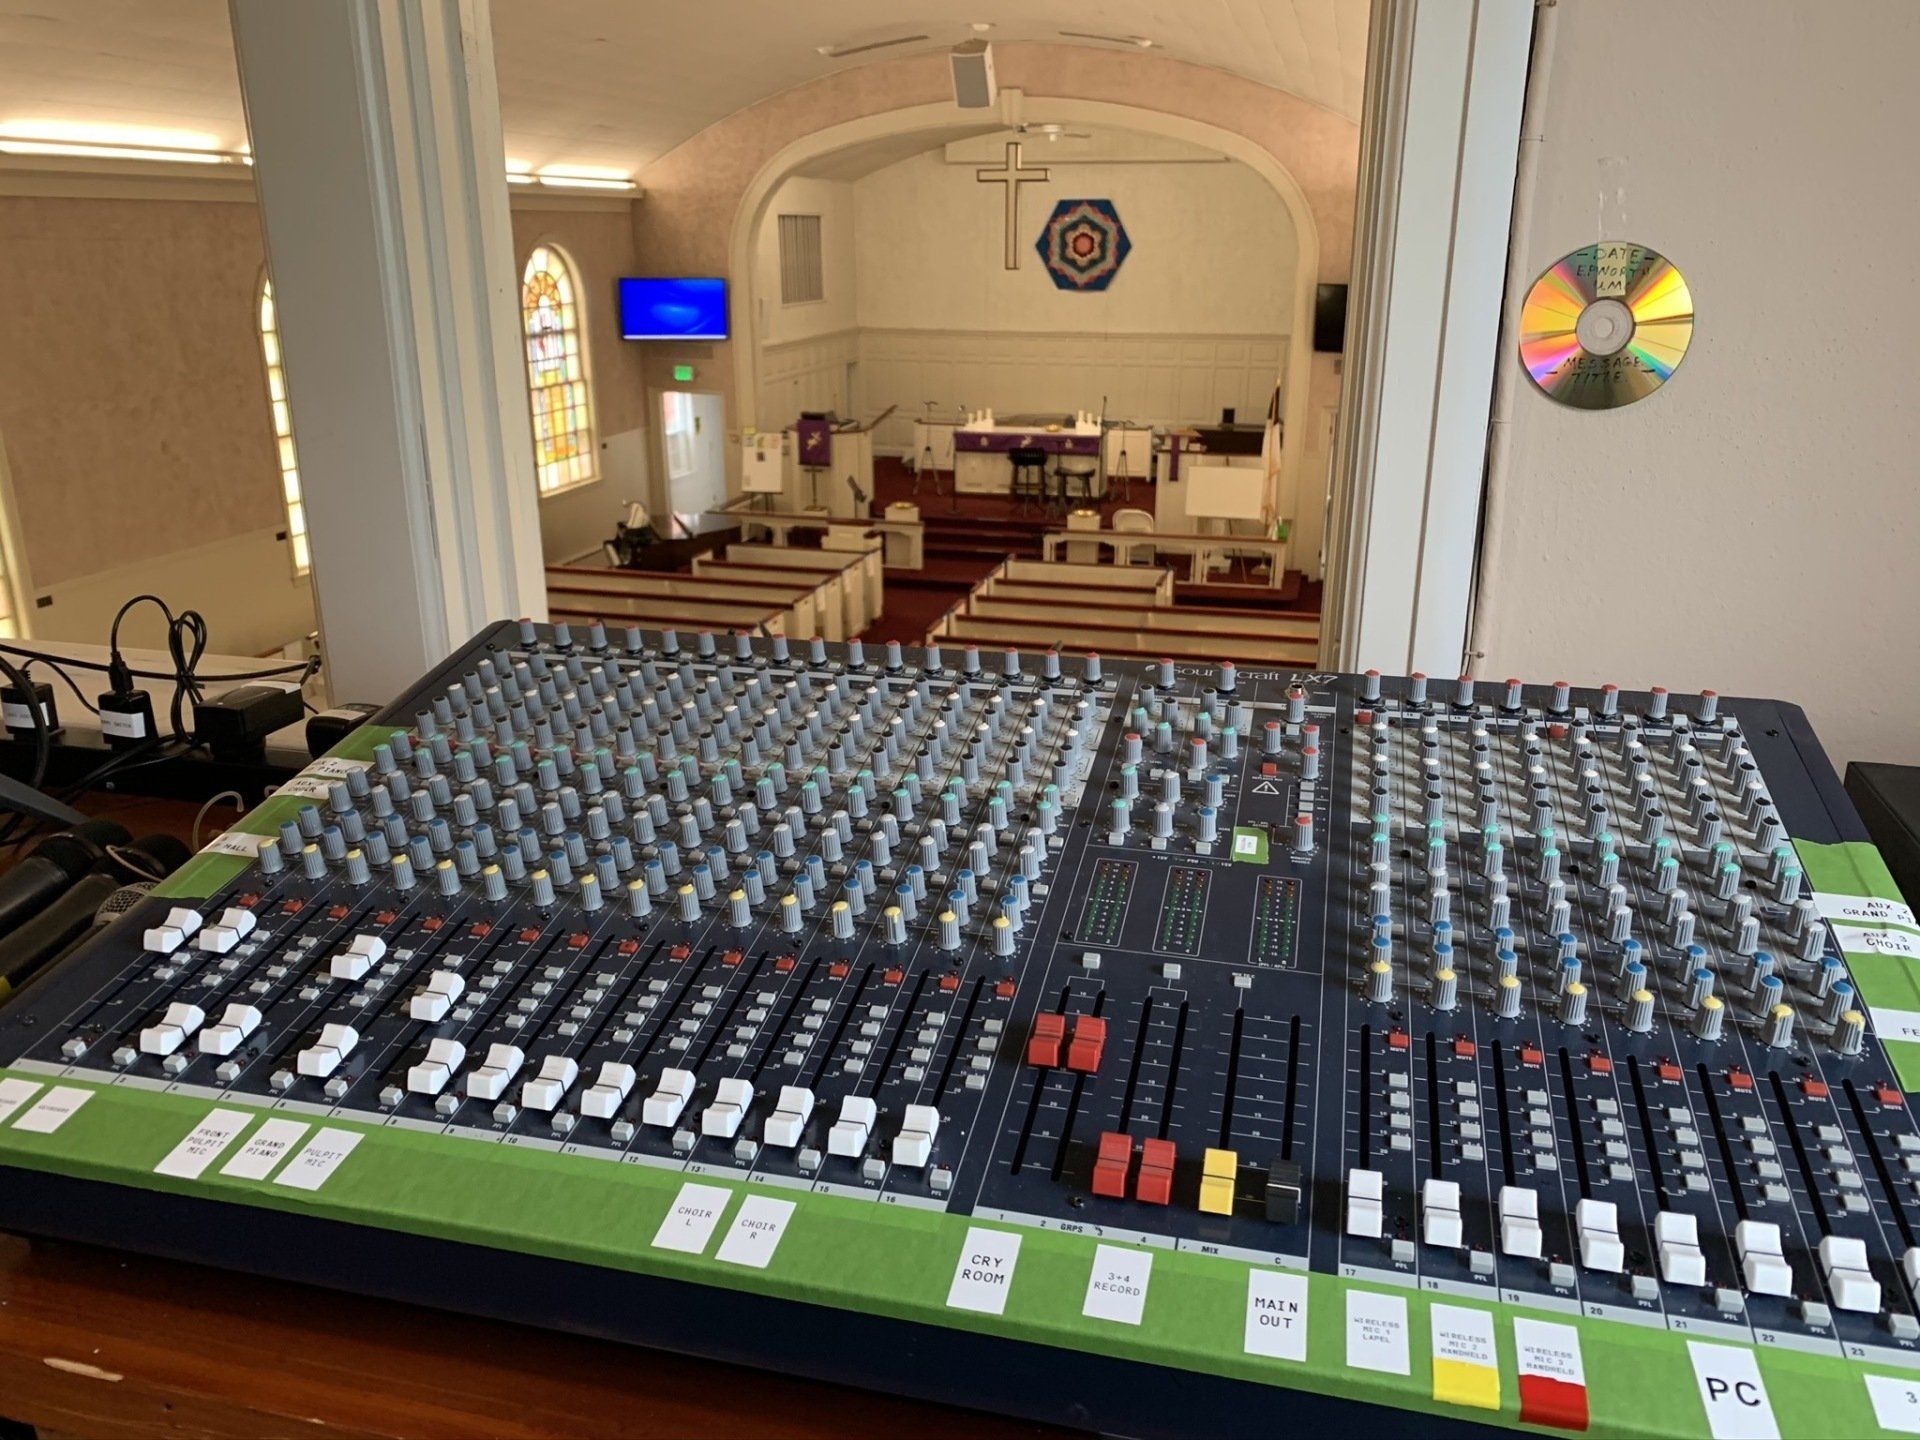 A mixer is sitting on a wooden table in front of a church.